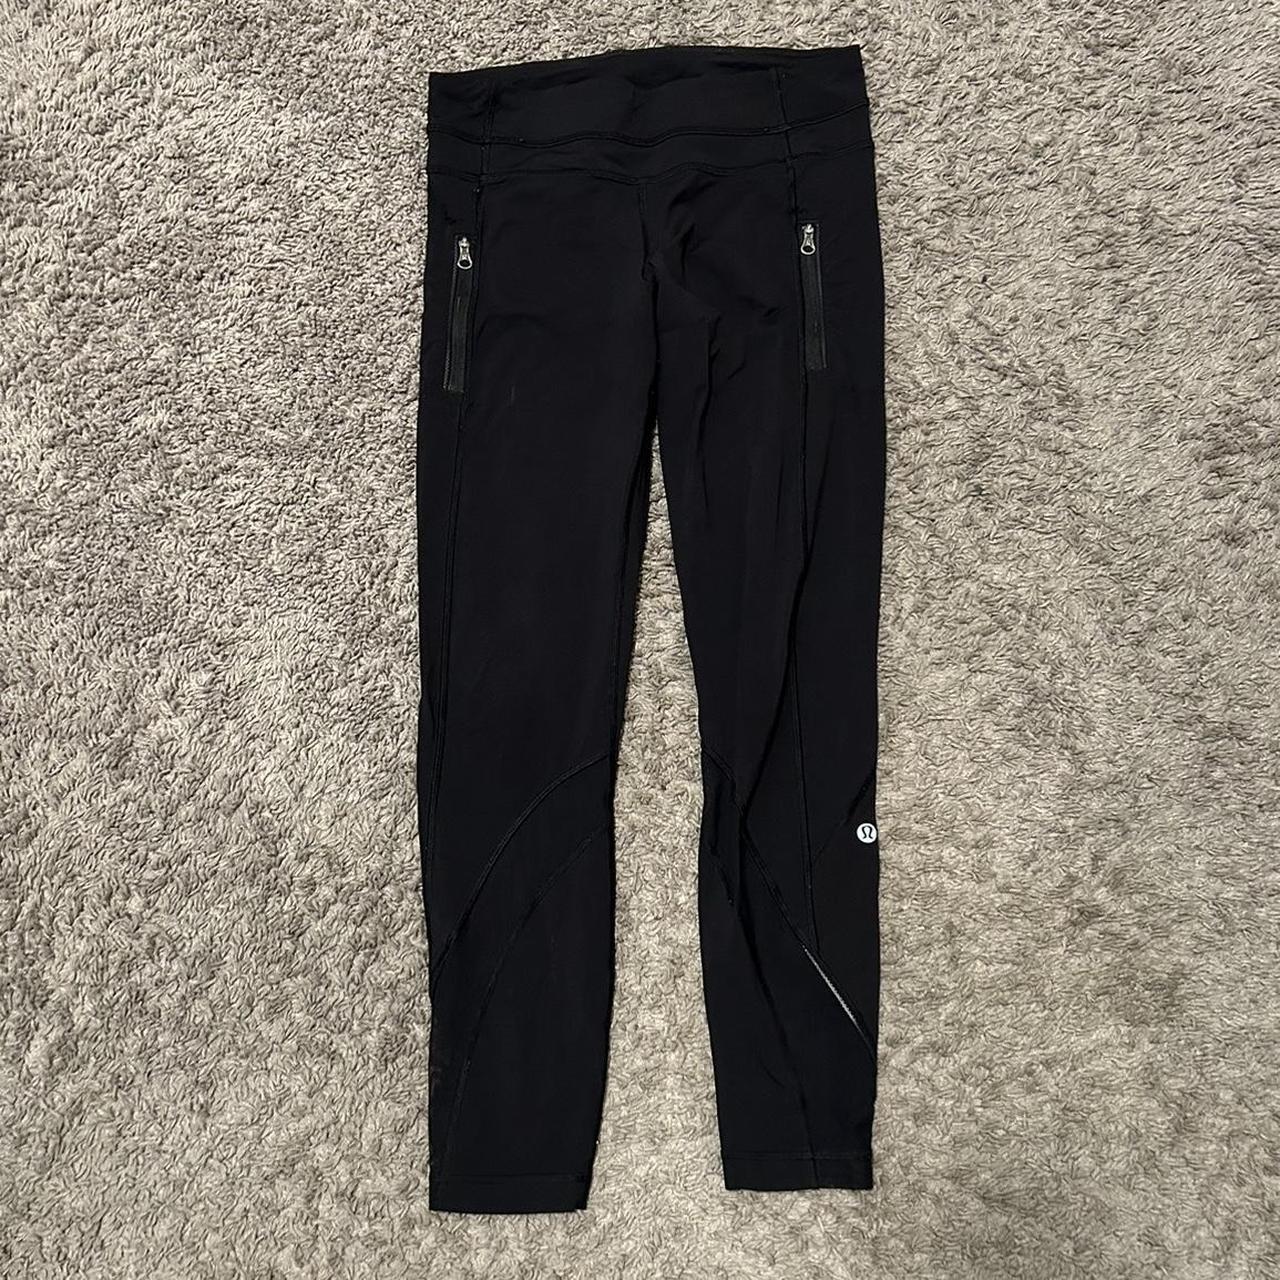 Lululemon Women's black and gray leggings with side pockets, size 6.